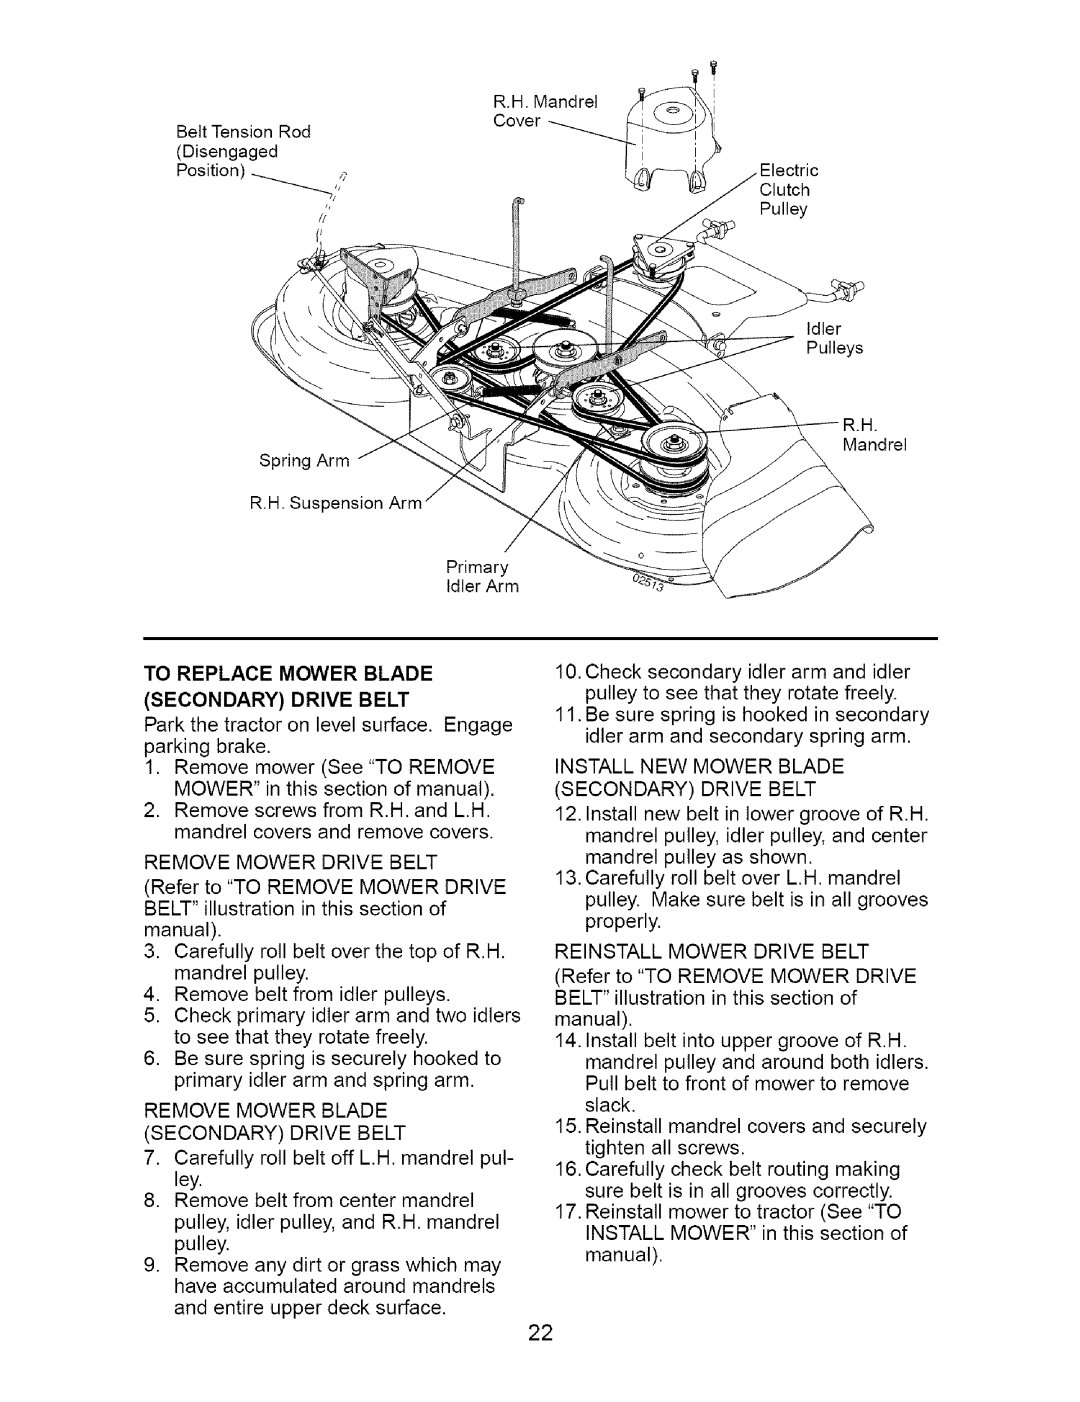 Craftsman 917.273663 owner manual Positionji7, BeltTensionRod Disengaged, To Replace Mower Blade 